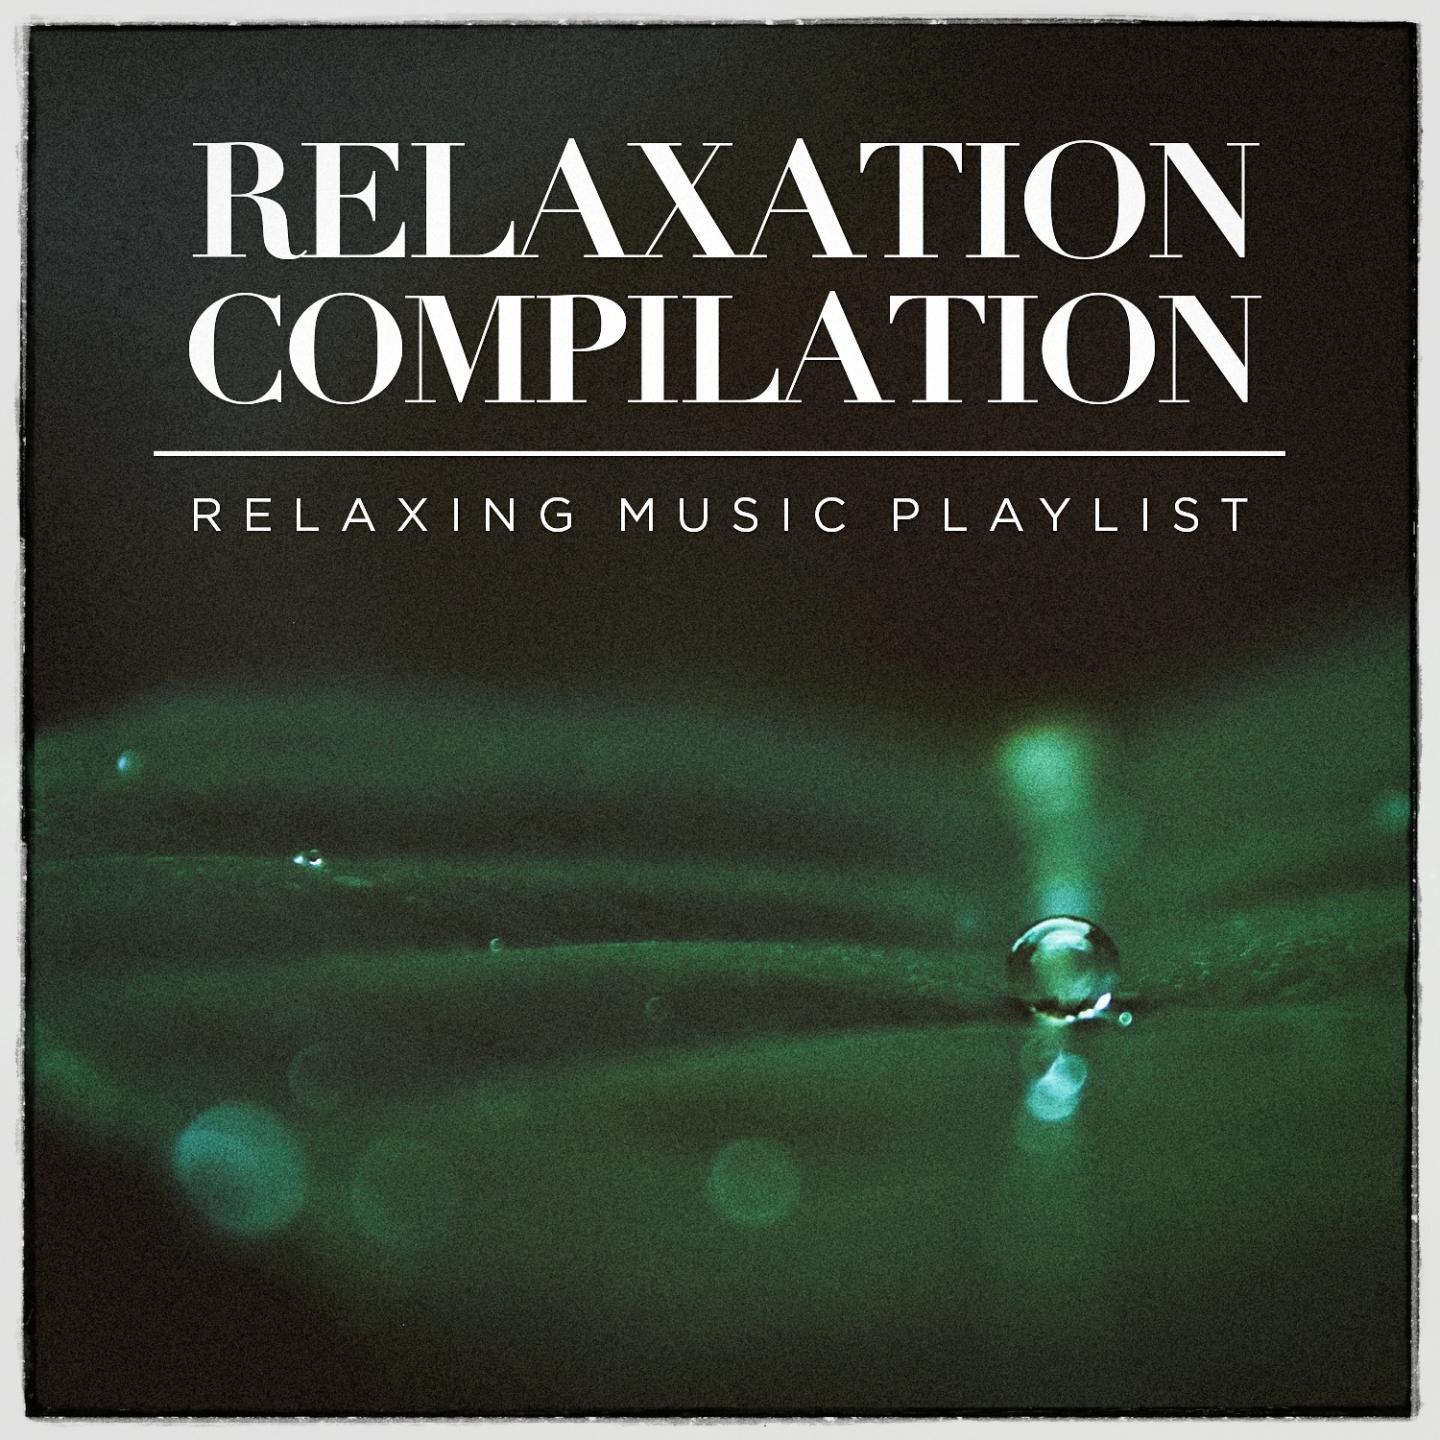 Relaxation Compilation - Relaxing Music Playlist